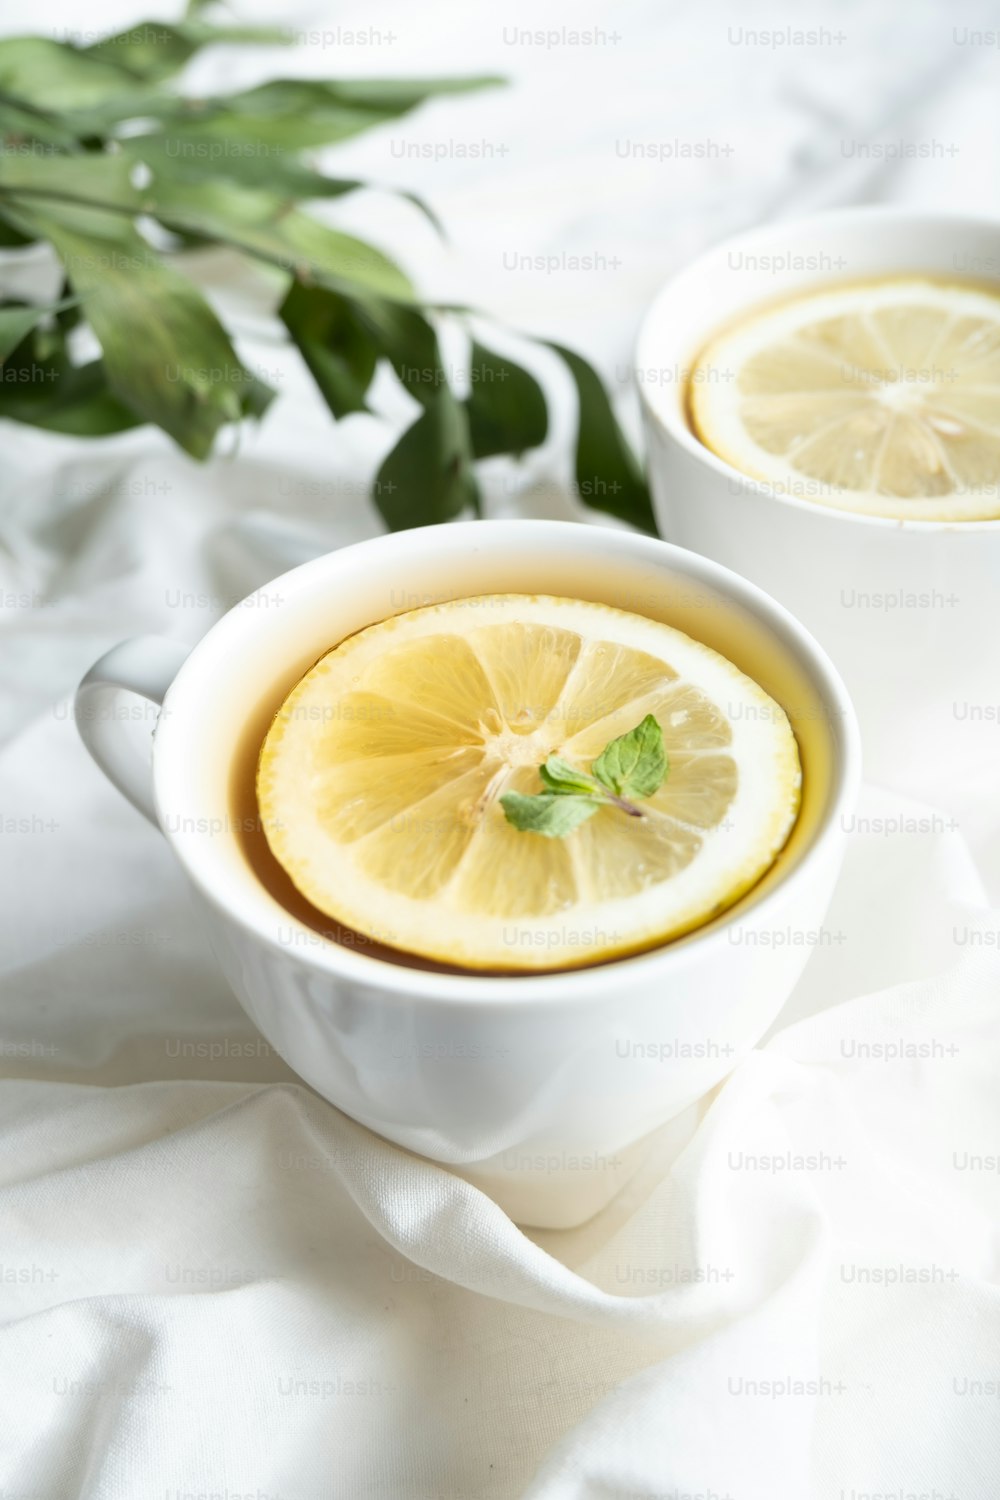 two cups of tea with lemon slices in them